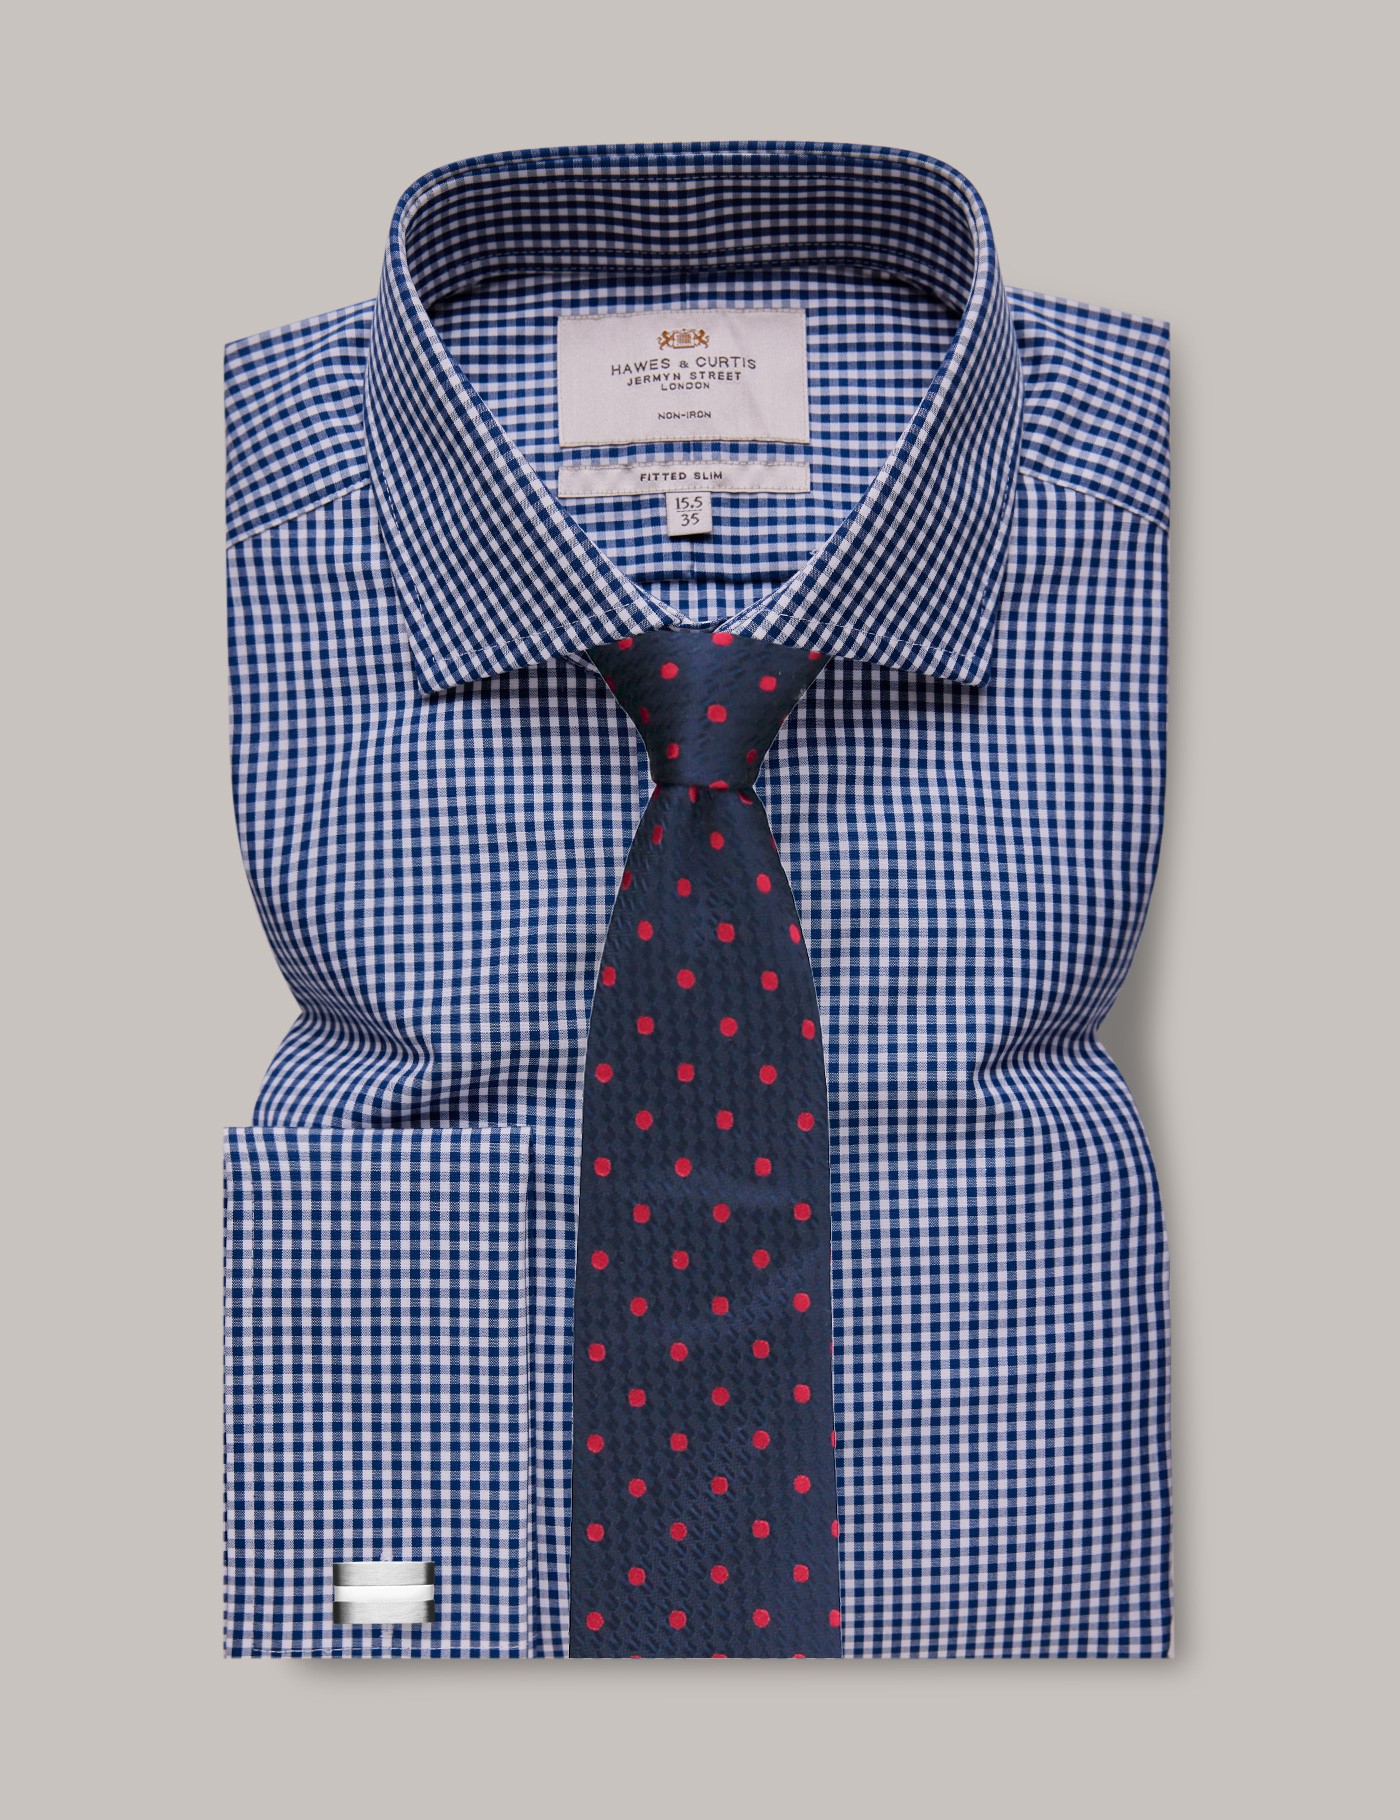 hawes & curtis non-iron navy & white gingham check fitted slim shirt - windsor collar - double cuff